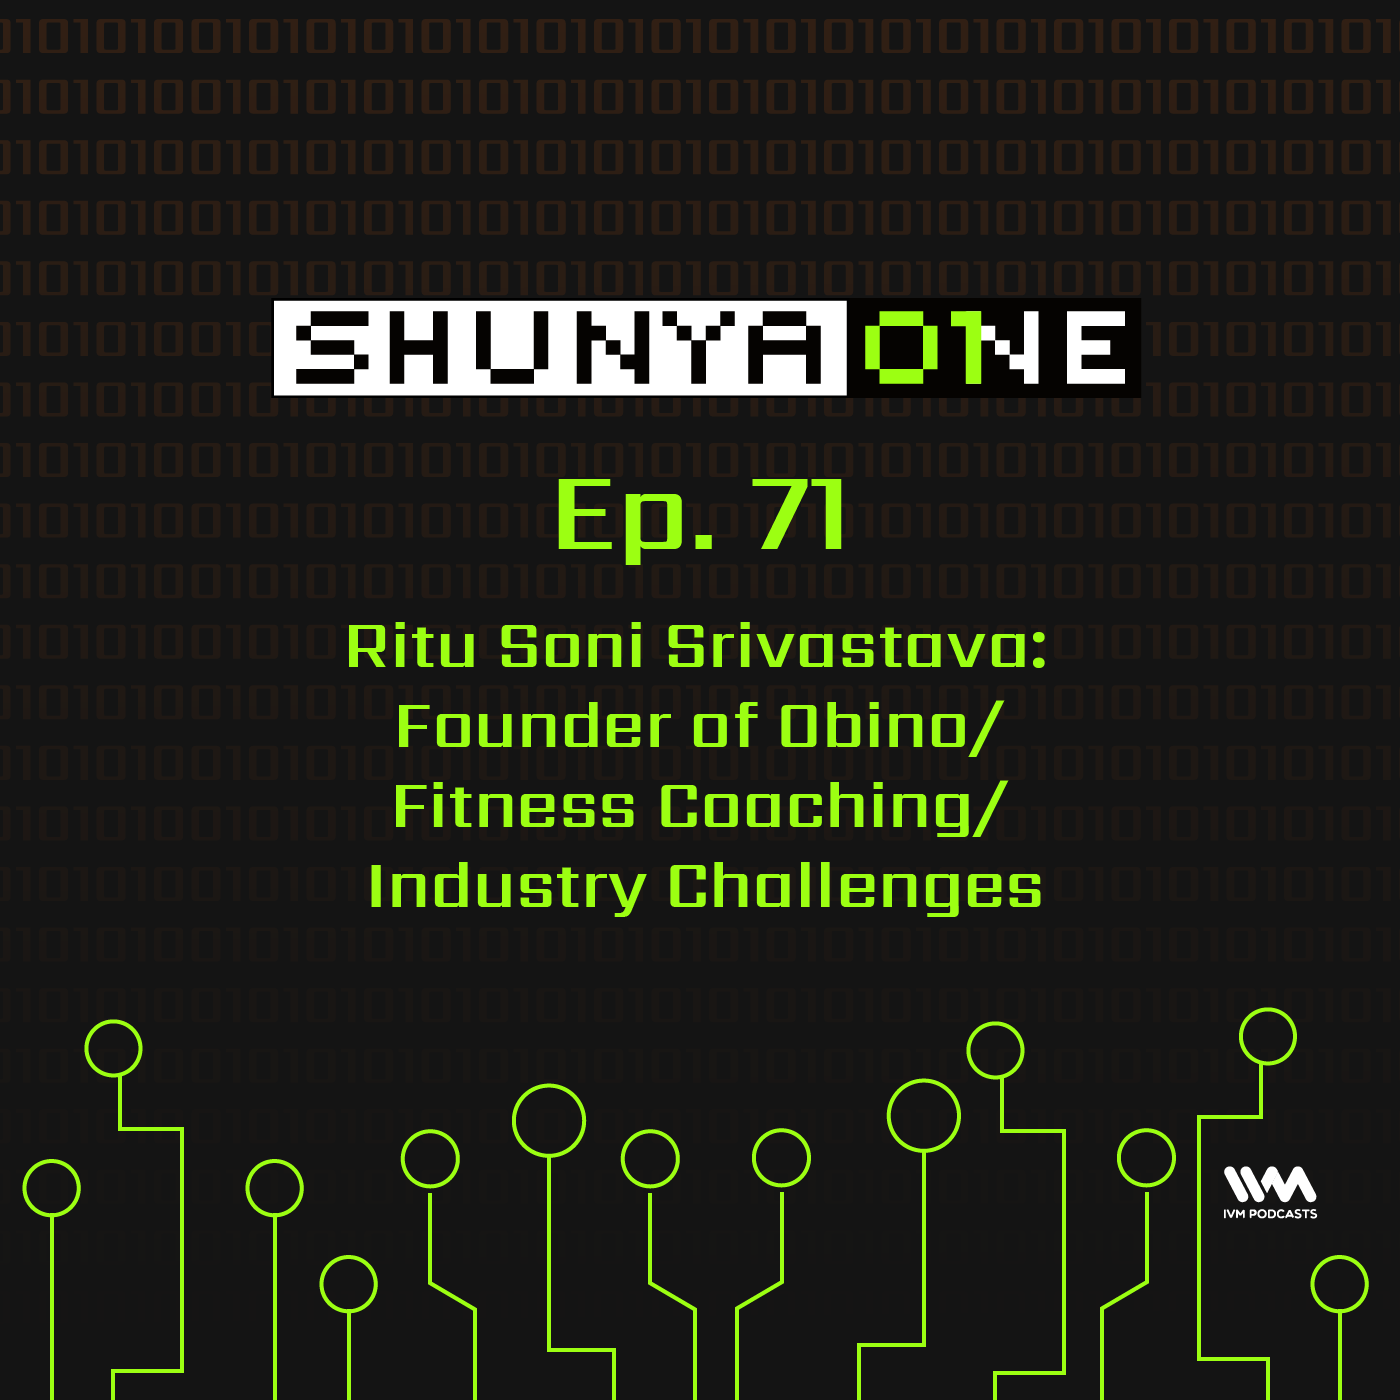 Feat. Ritu Soni Srivastava: Founder of Obino/ Fitness Coaching/ Industry Challenges